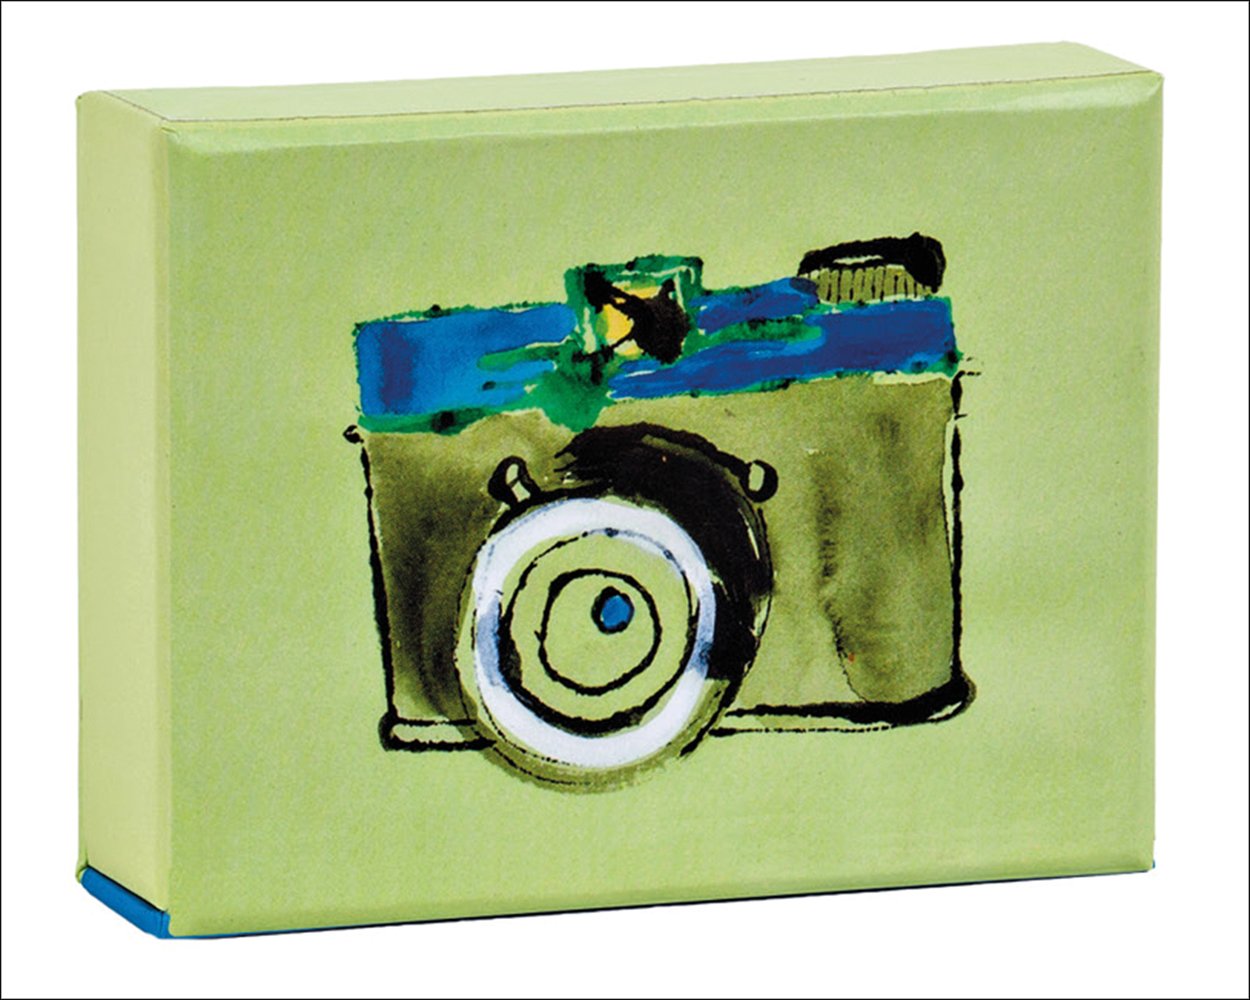 Watercolour painting of camera by Kimberly Ellen Hall, on playing card box, by teNeues stationery.